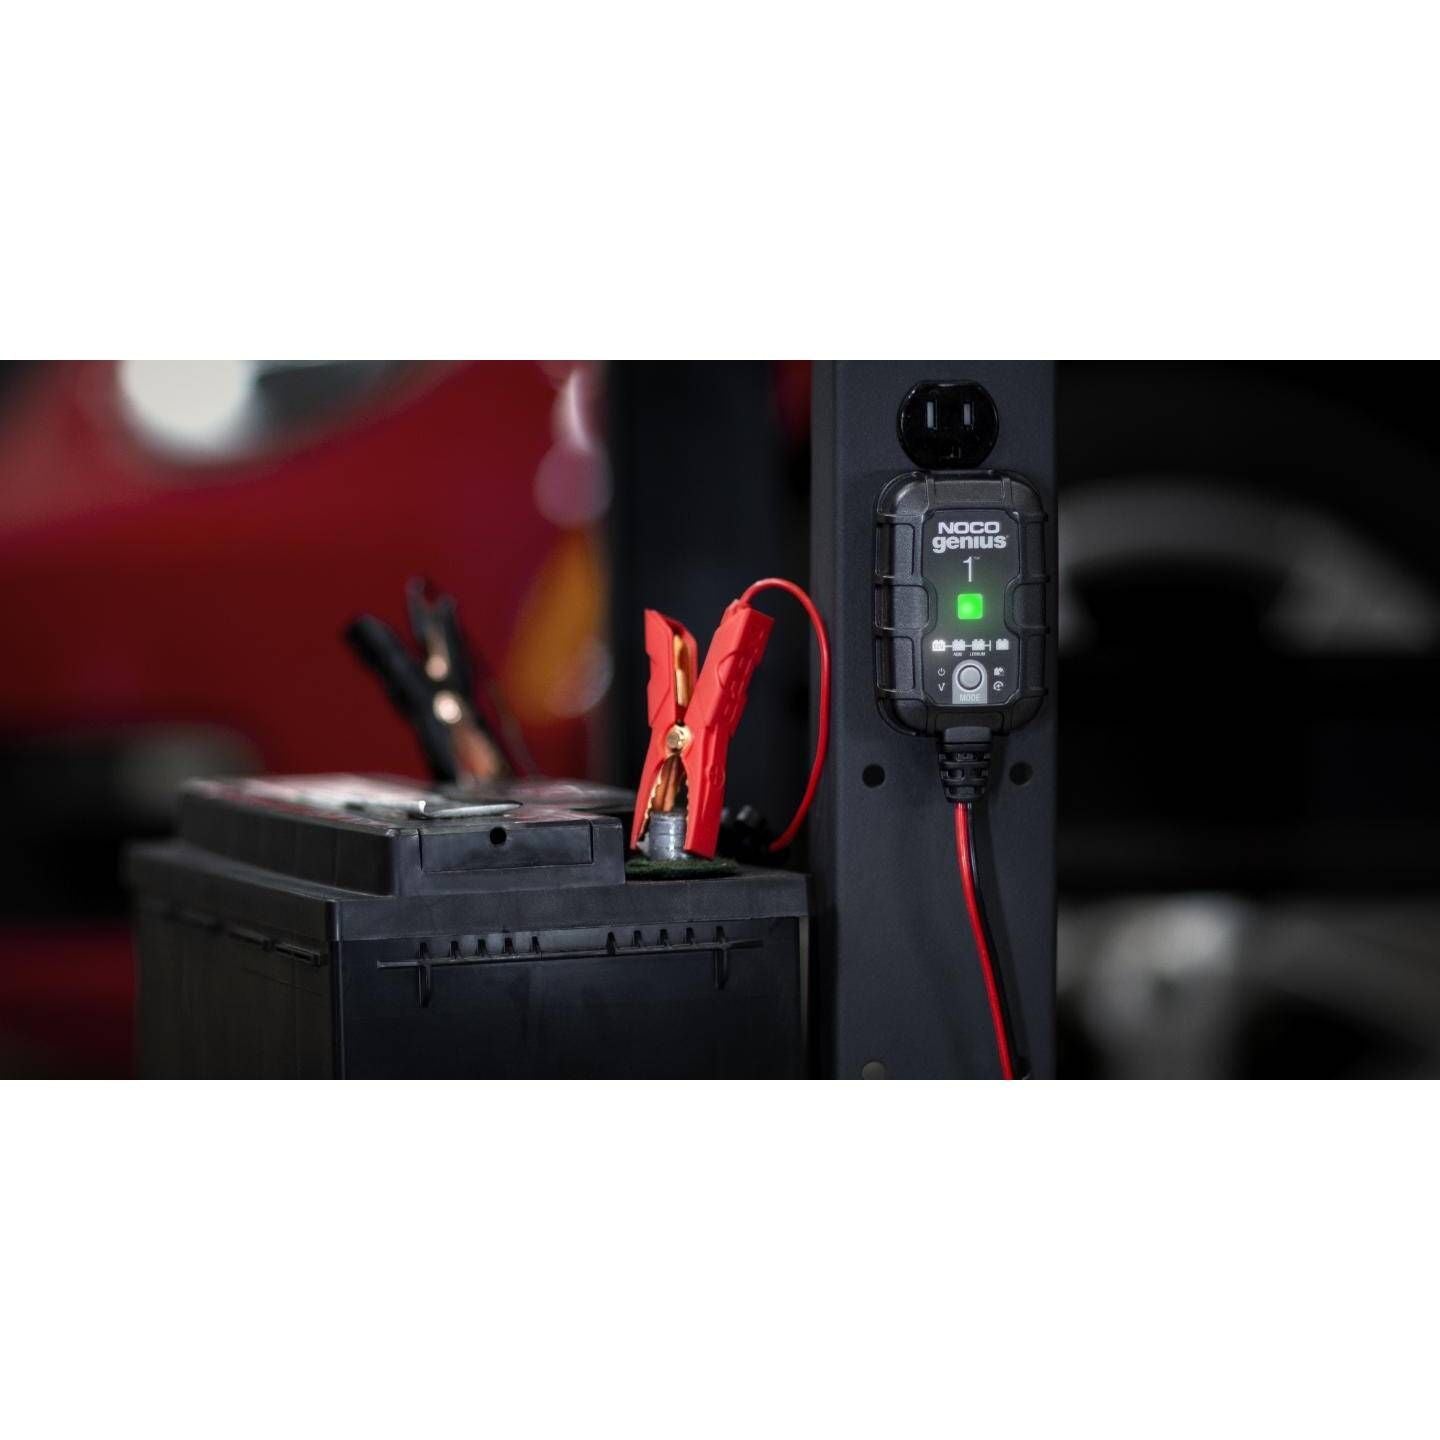 NOCO Genius 1 Battery Charger + Maintainer – Adventure Power Products Ltd.